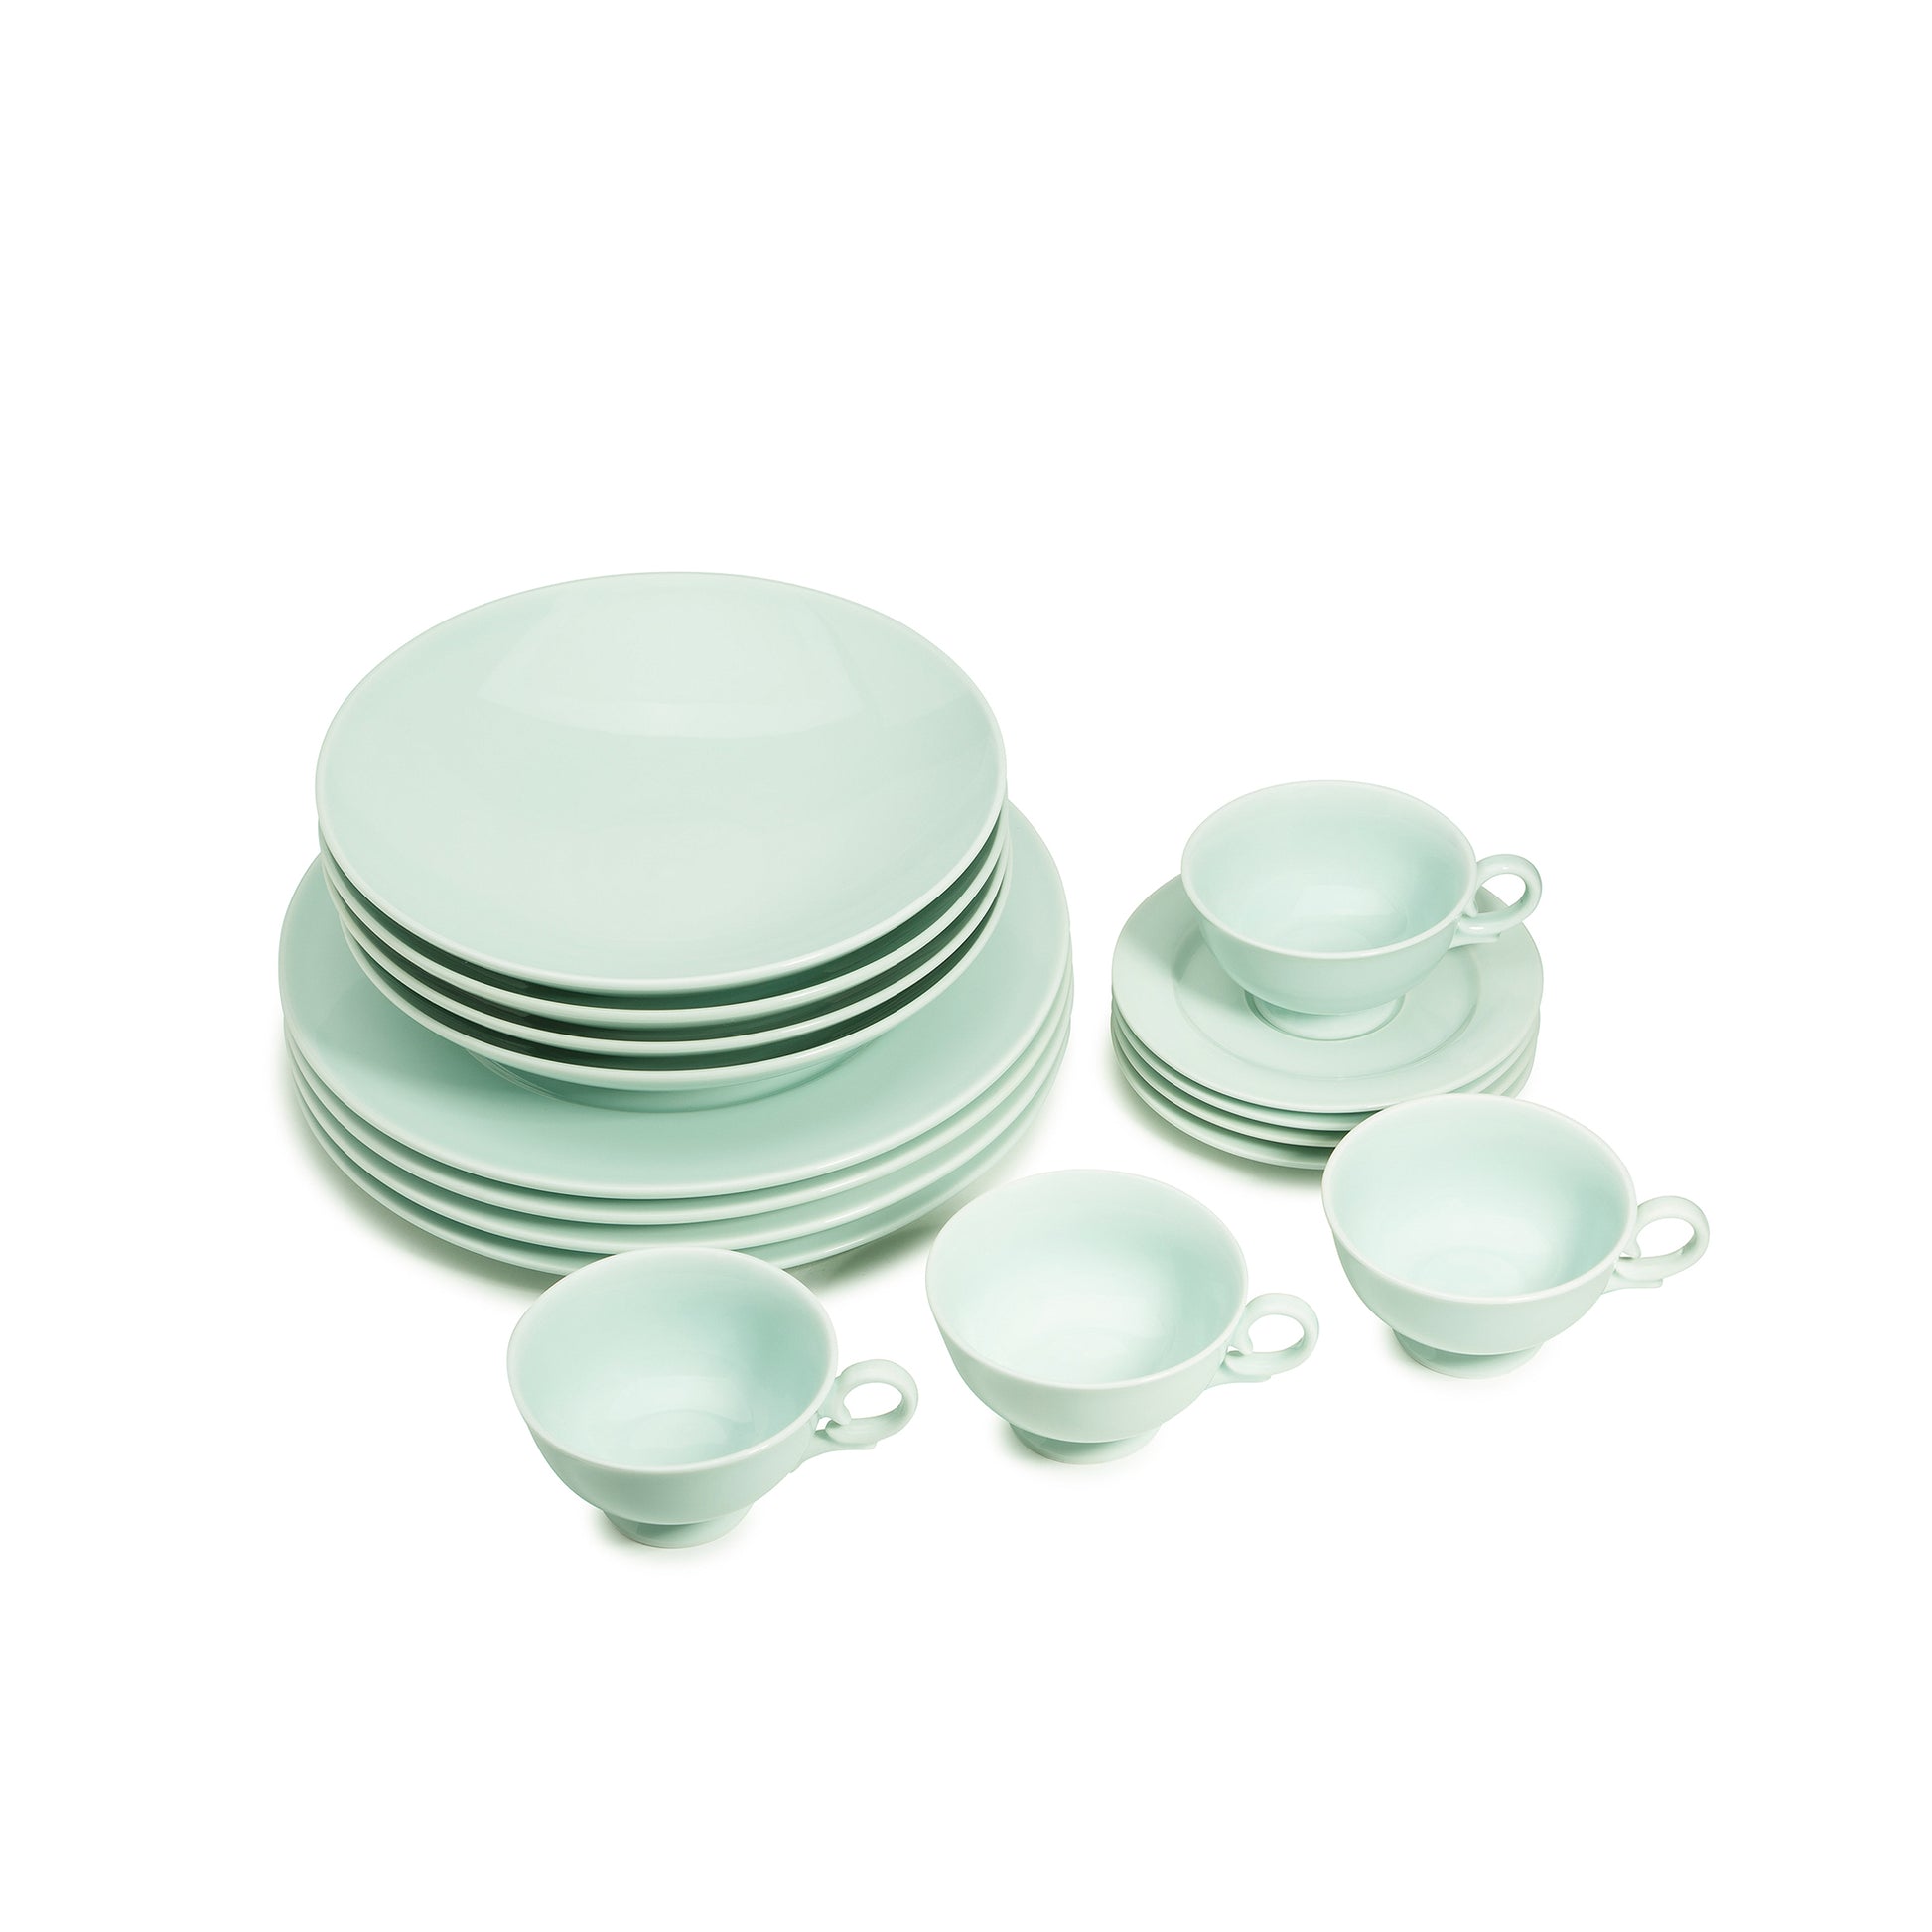 16 piece green celadon porcelain dinnerware set, dinner plates, 9" salad bowls, coffee cups and saucers, media 4 of 5